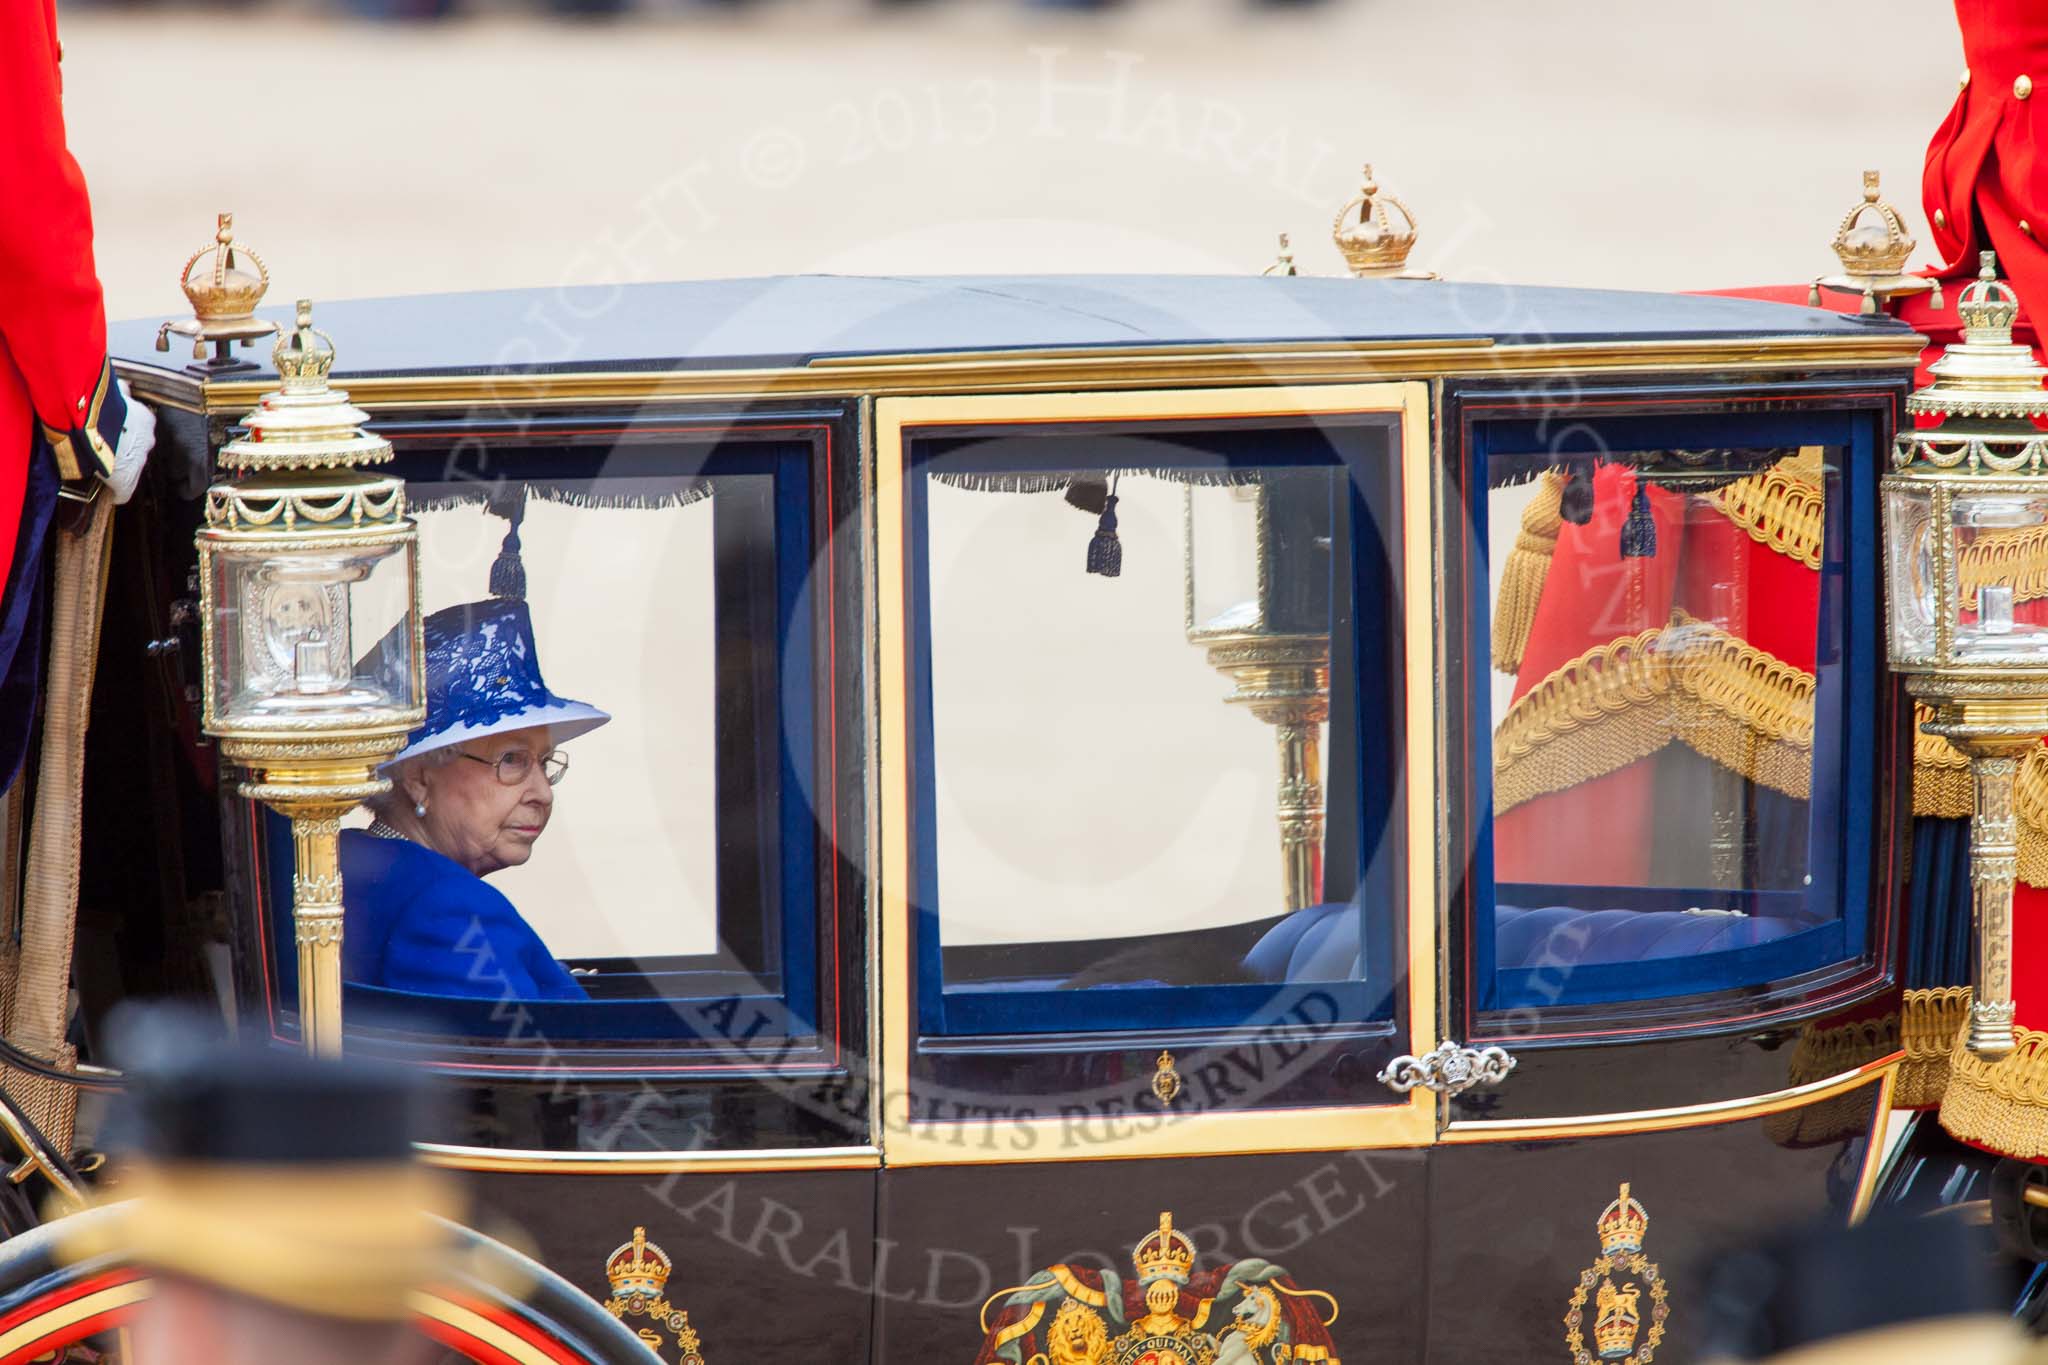 Trooping the Colour 2013: HM The Queen in the glass coach, leaving Horse Guards Parade. Image #818, 15 June 2013 12:11 Horse Guards Parade, London, UK